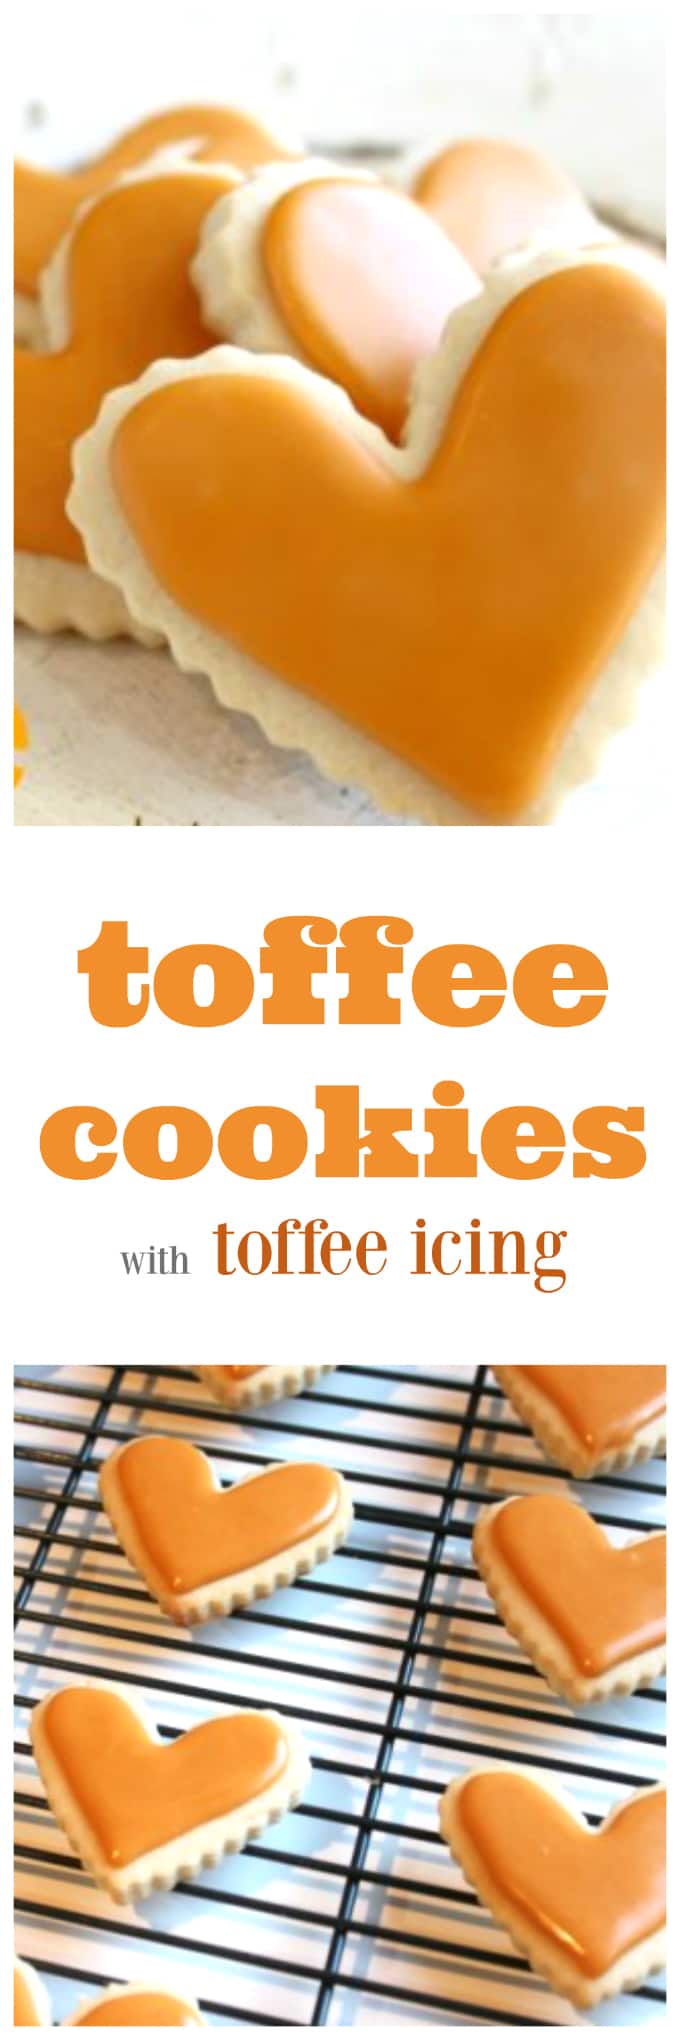 toffee cookies with toffee icing @createdbydiane